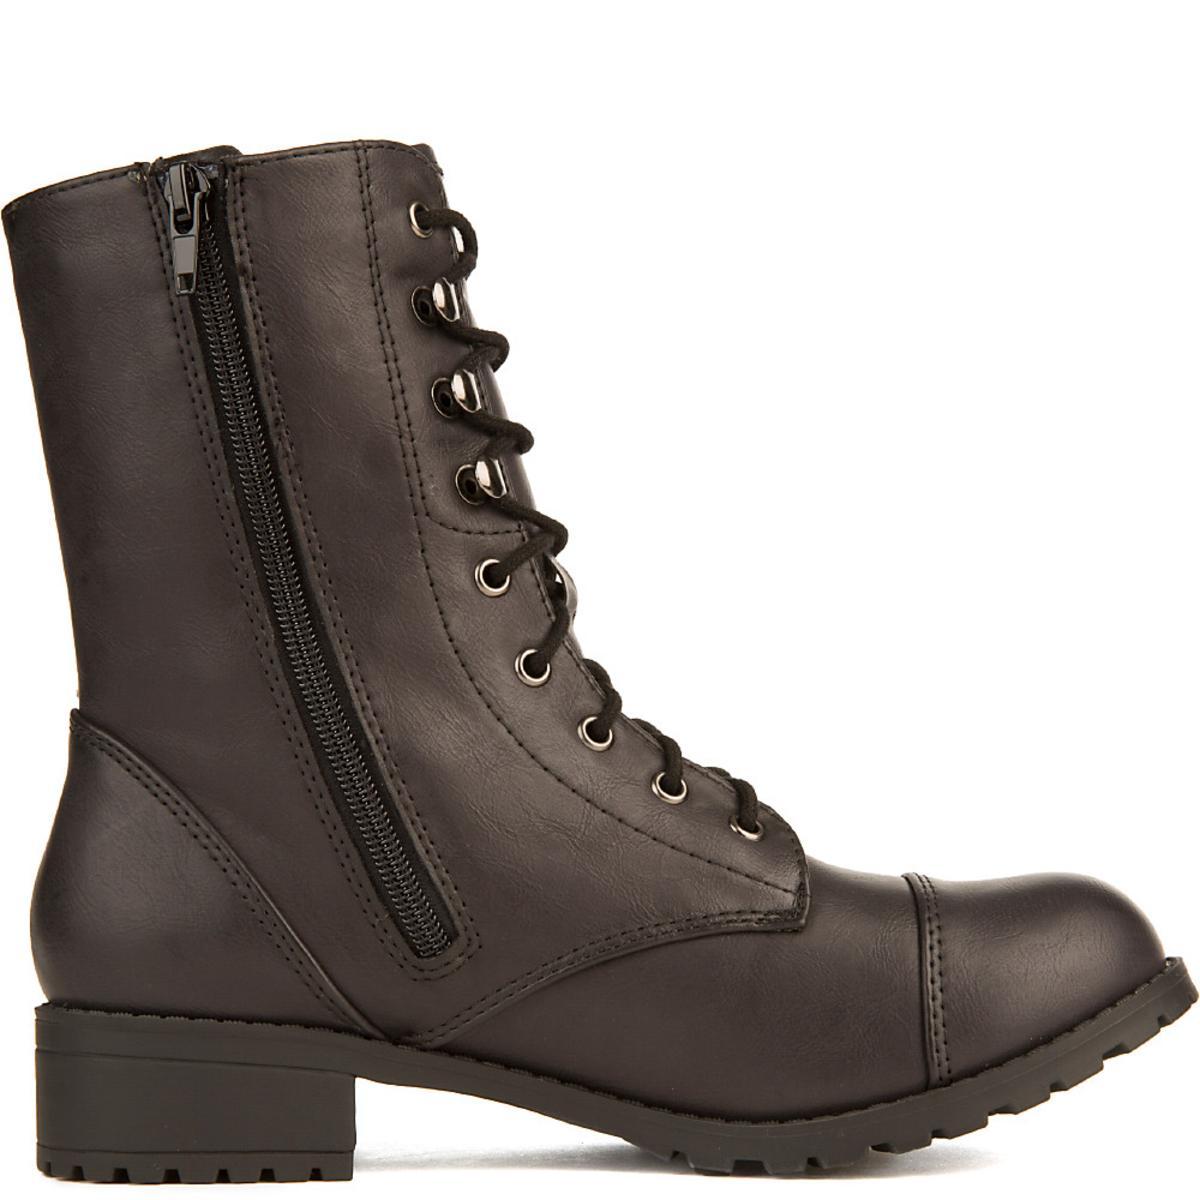 Footer-S Lace-Up Combat Boot Black